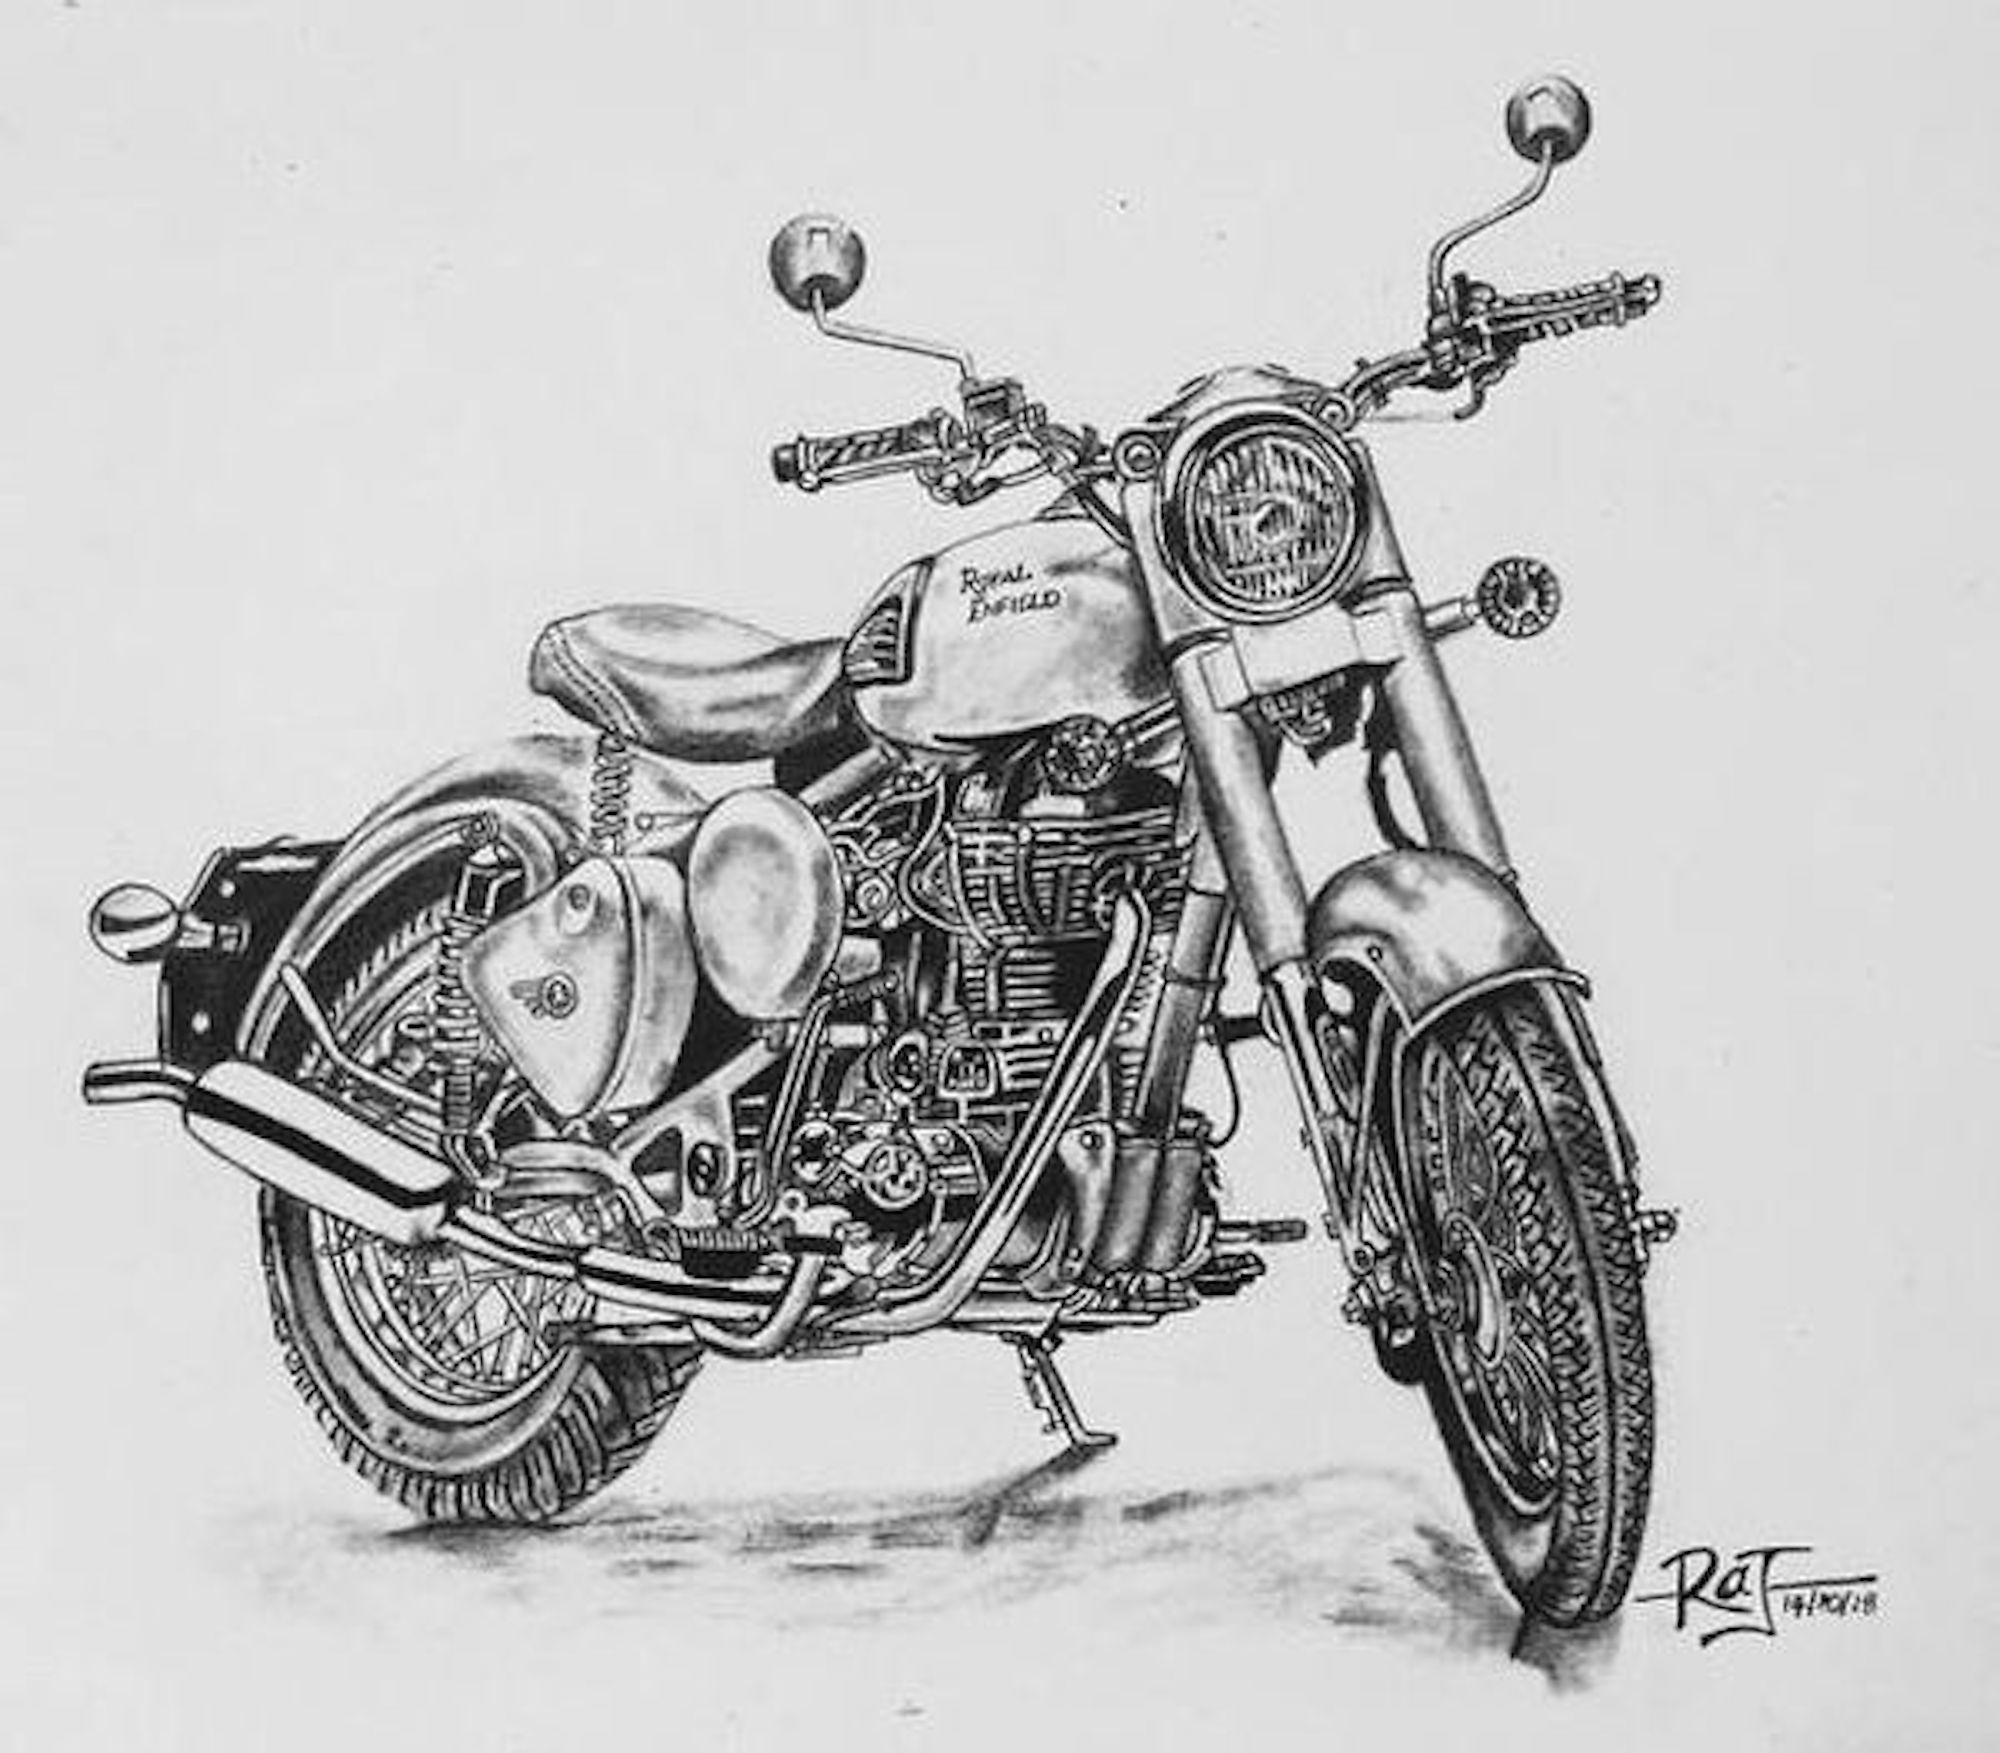 A sketch of a Royal Enfield motorcycle. Media sourced from the Royal Enfield Riders Club.